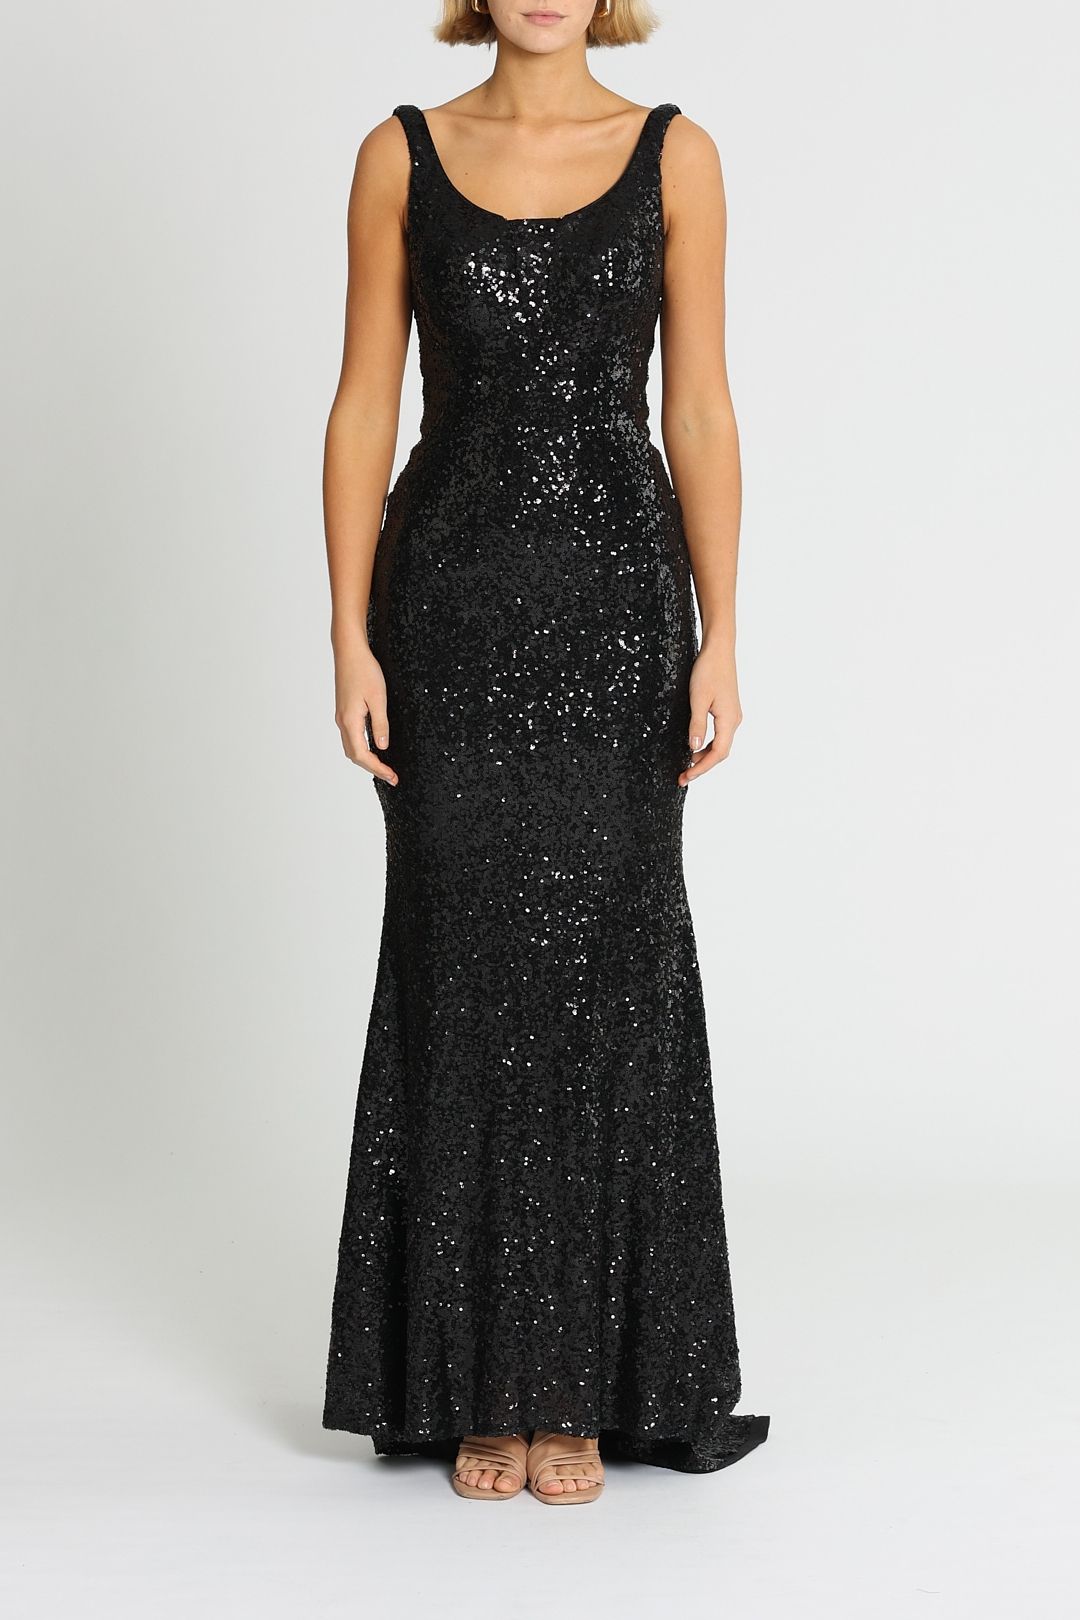 Tinaholy Annalise Sequin Gown Black